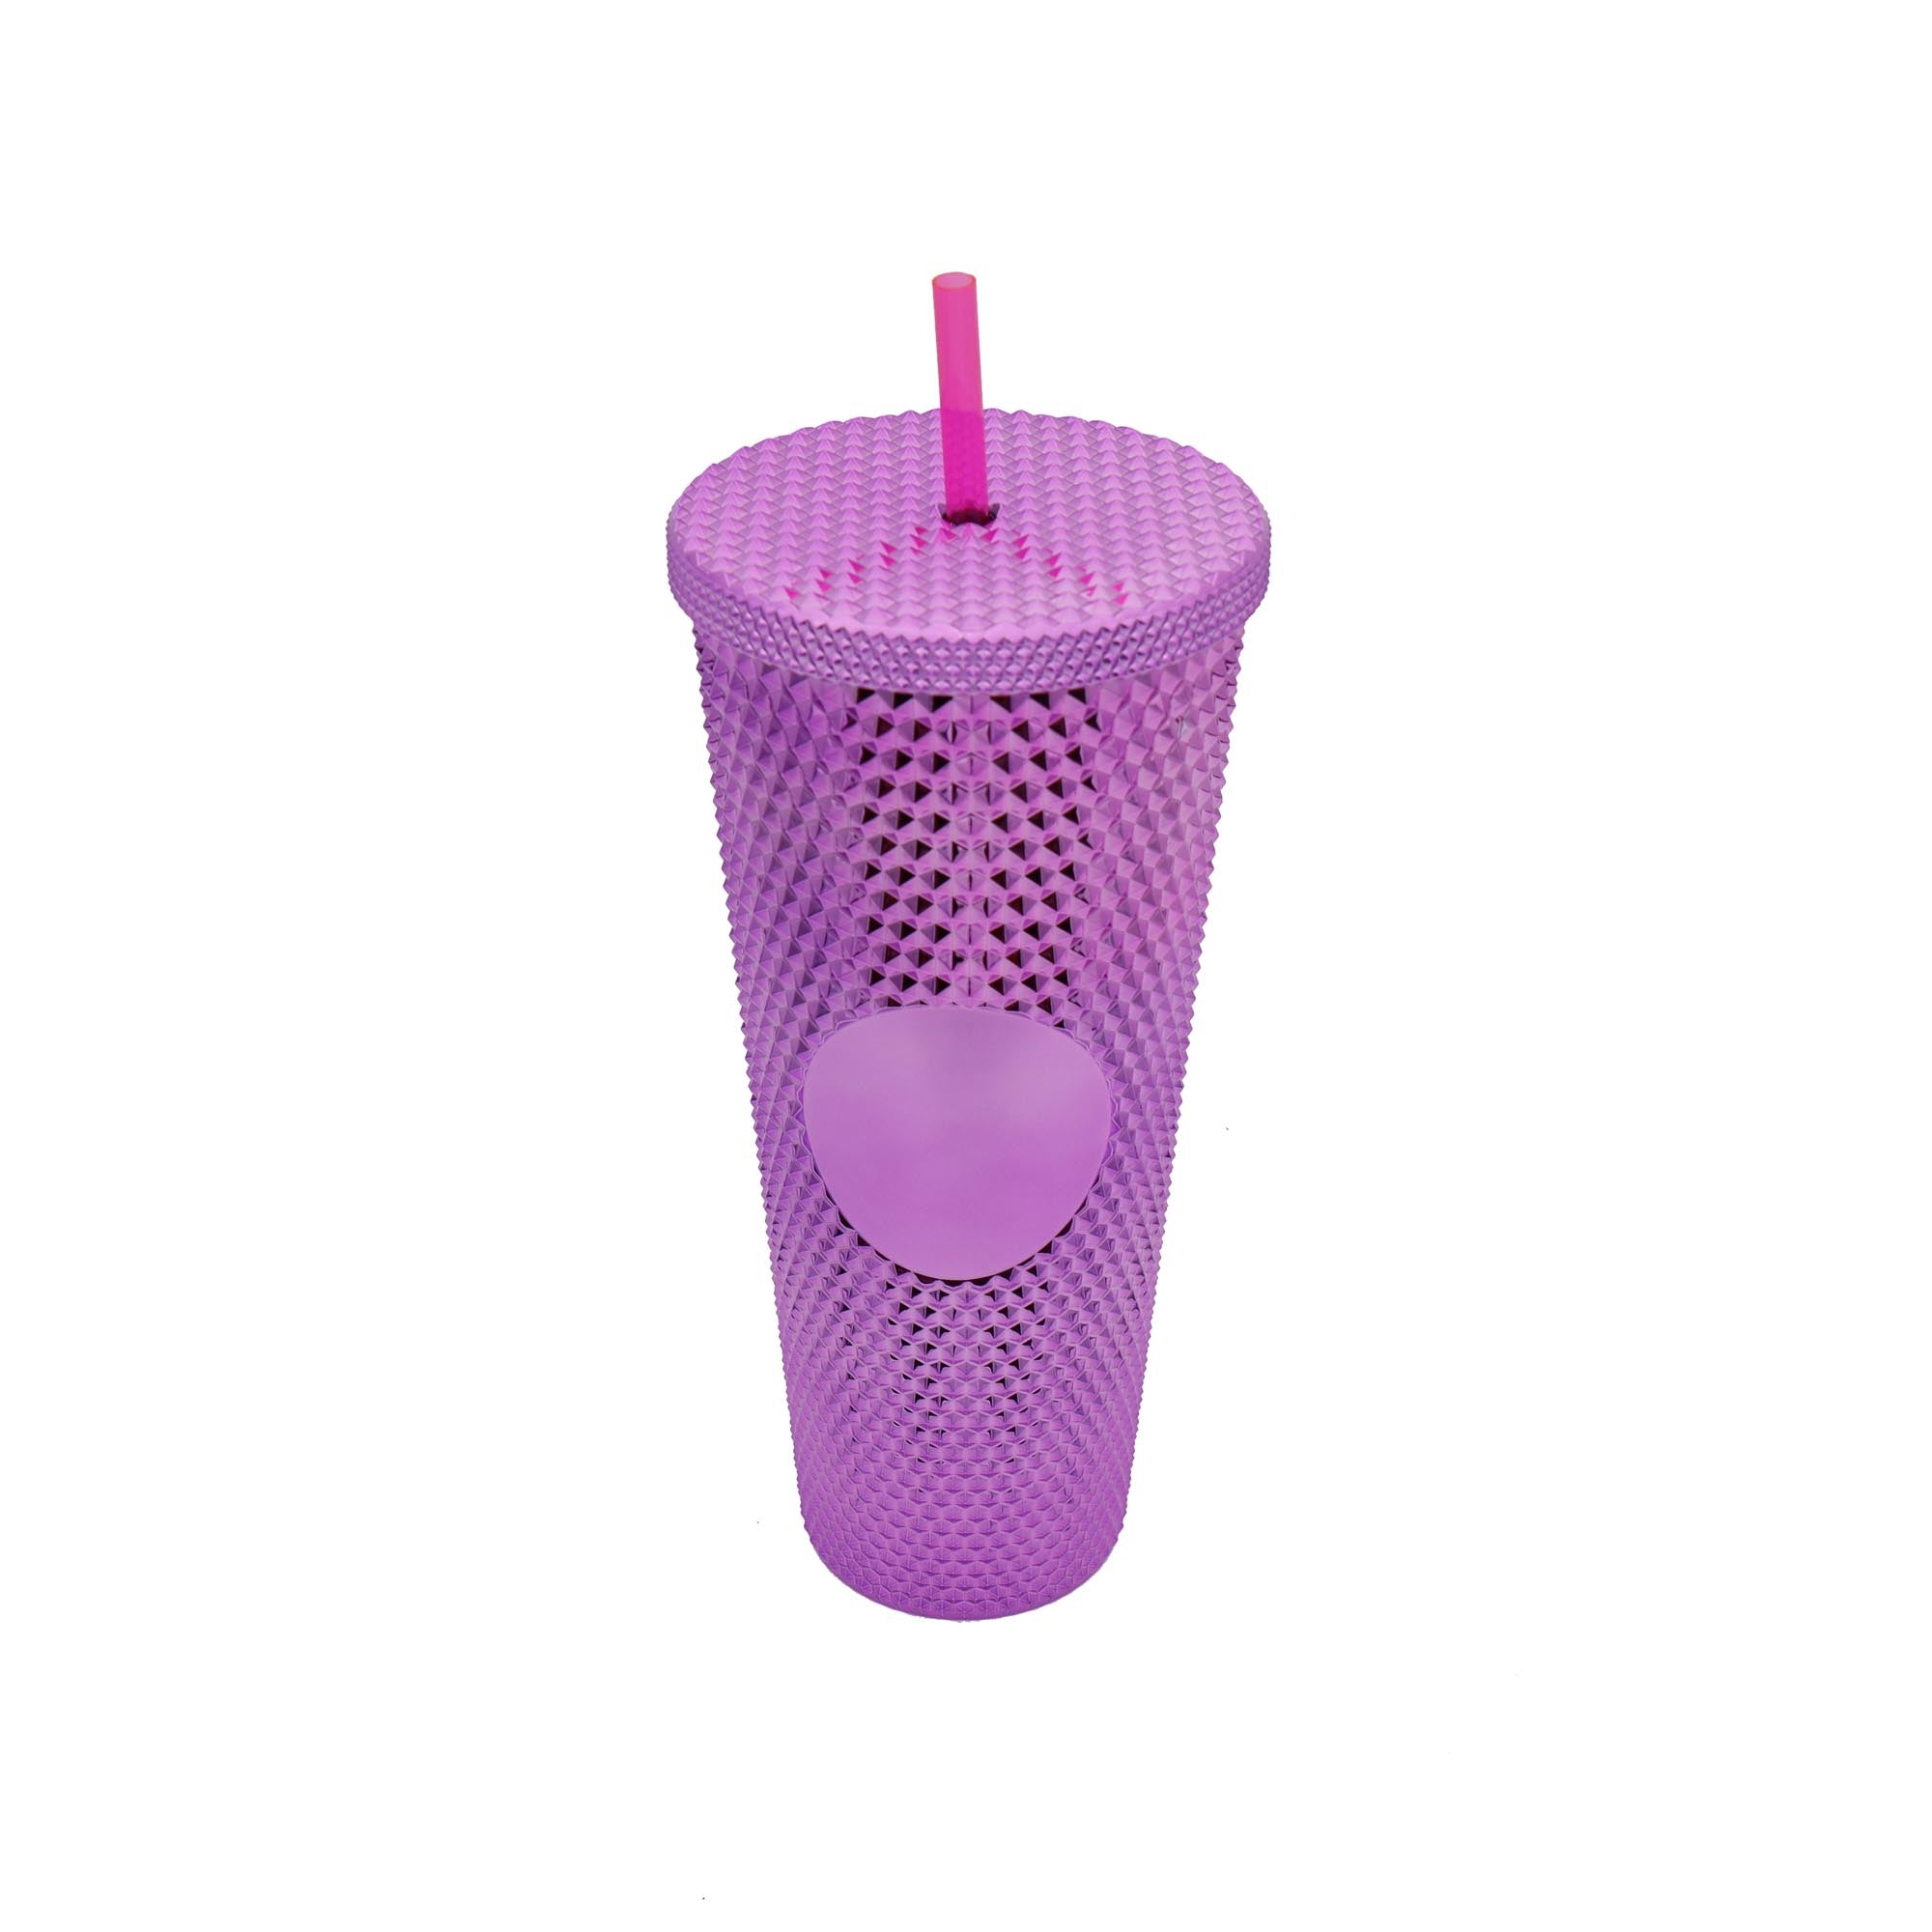 Studded Drinking Tumbler 720ml Smoothie Glitter Cup & Straw